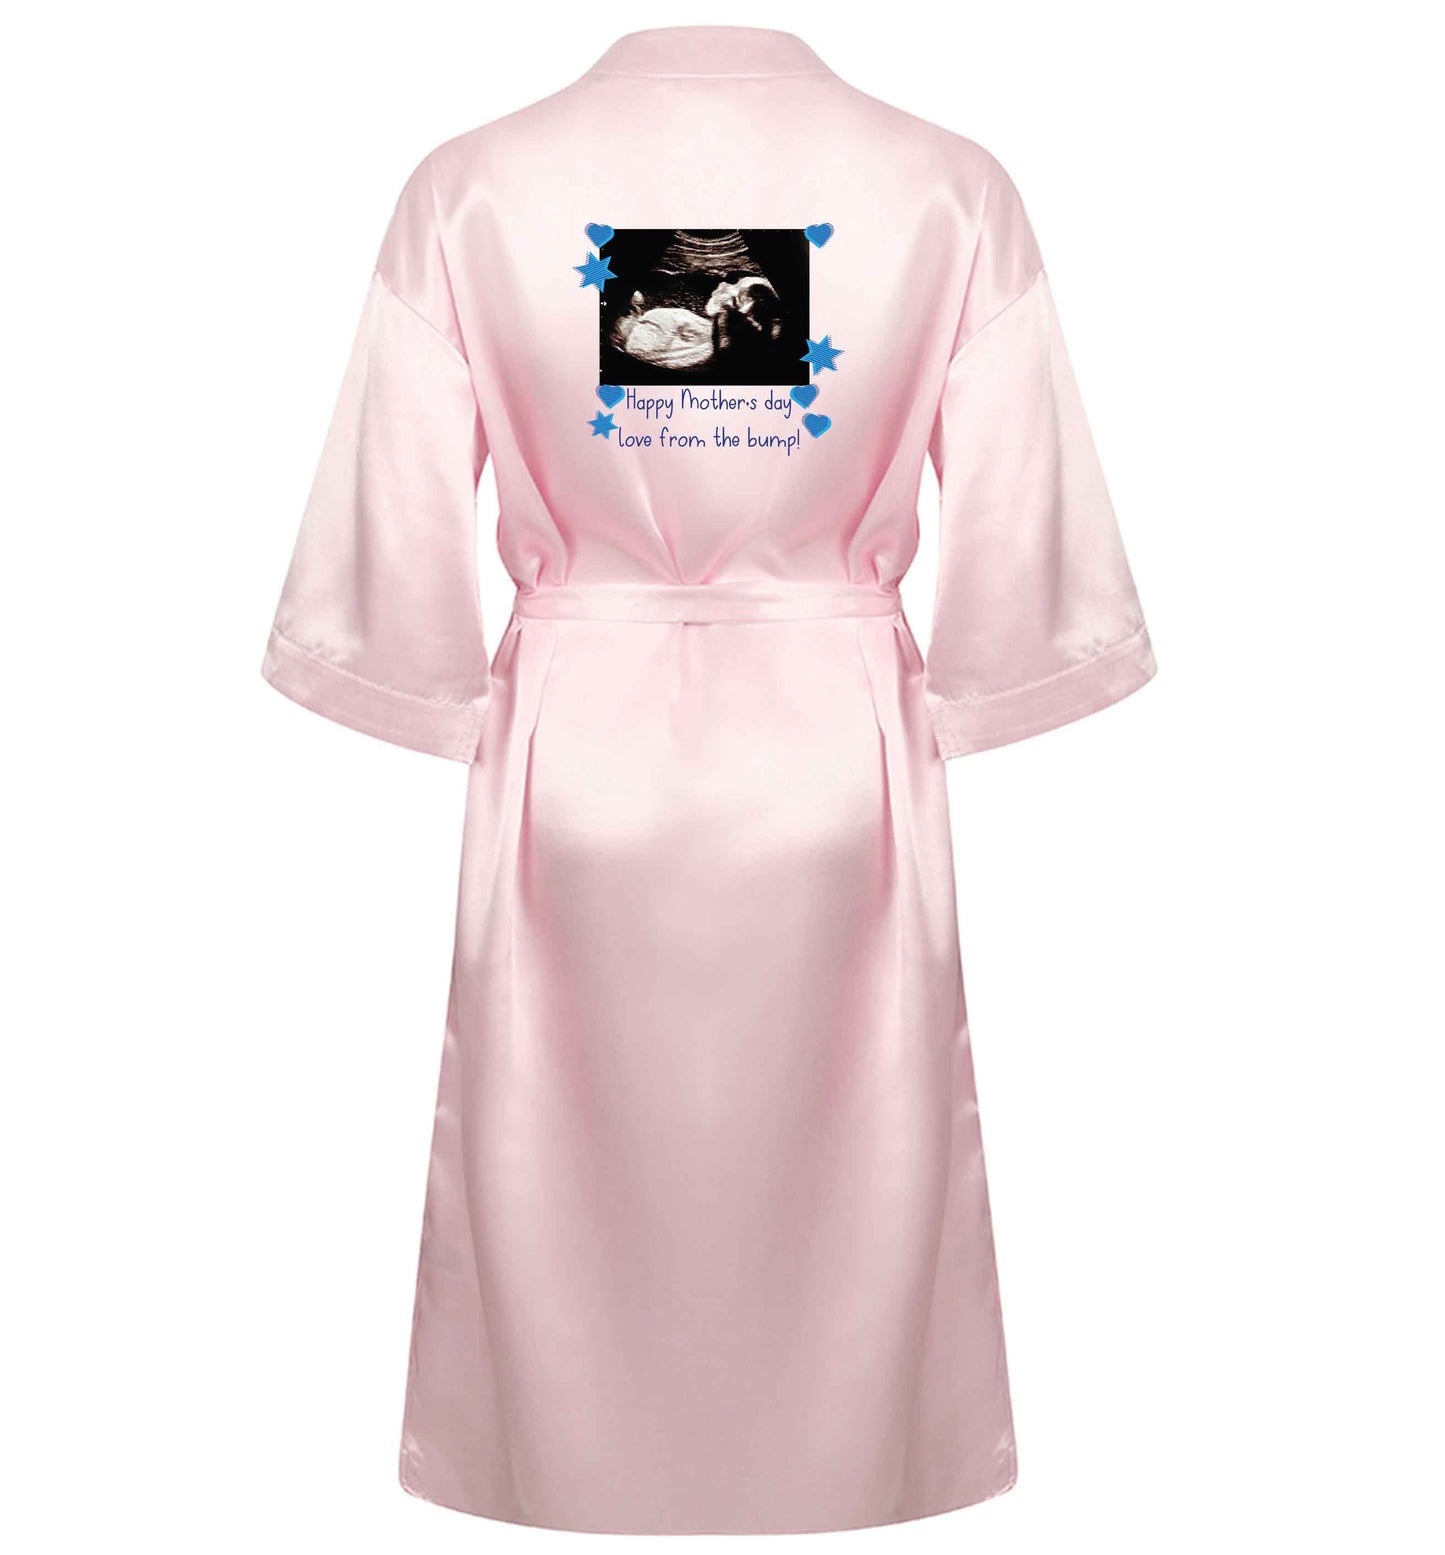 Happy Mother's day love from the bump - blue XL/XXL pink ladies dressing gown size 16/18